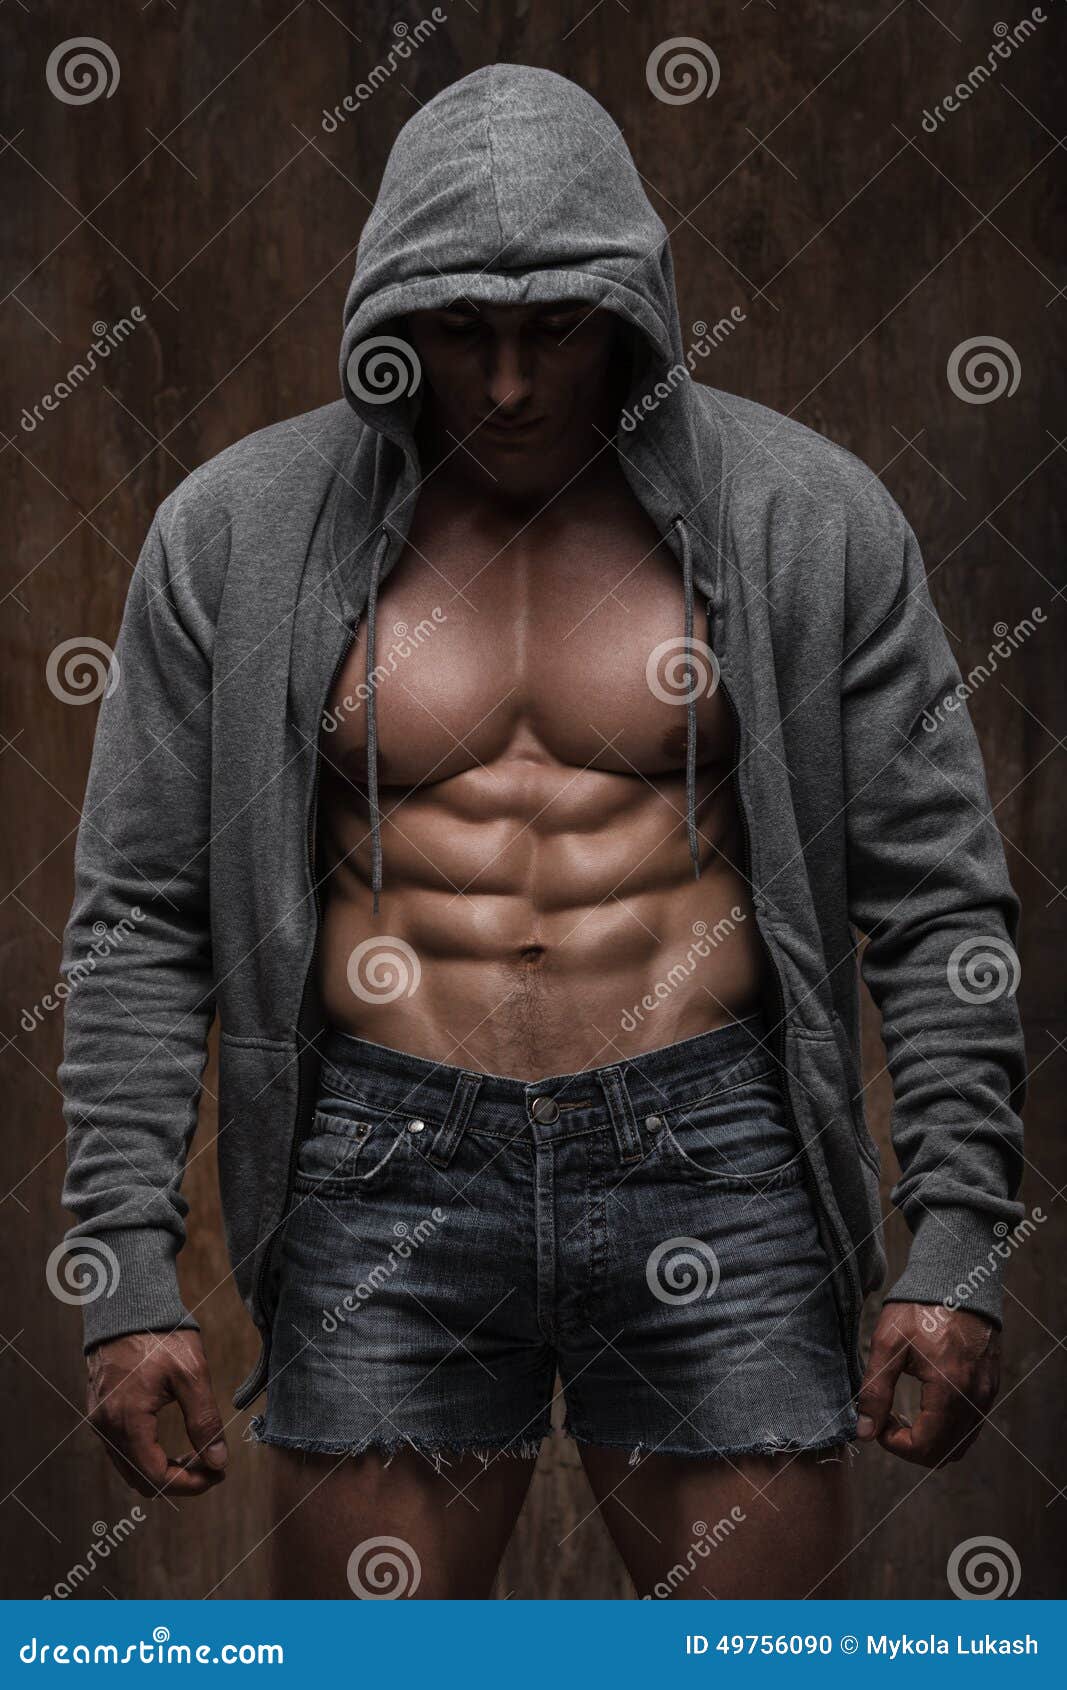 young muscular man with open jacket revealing muscular chest and abs